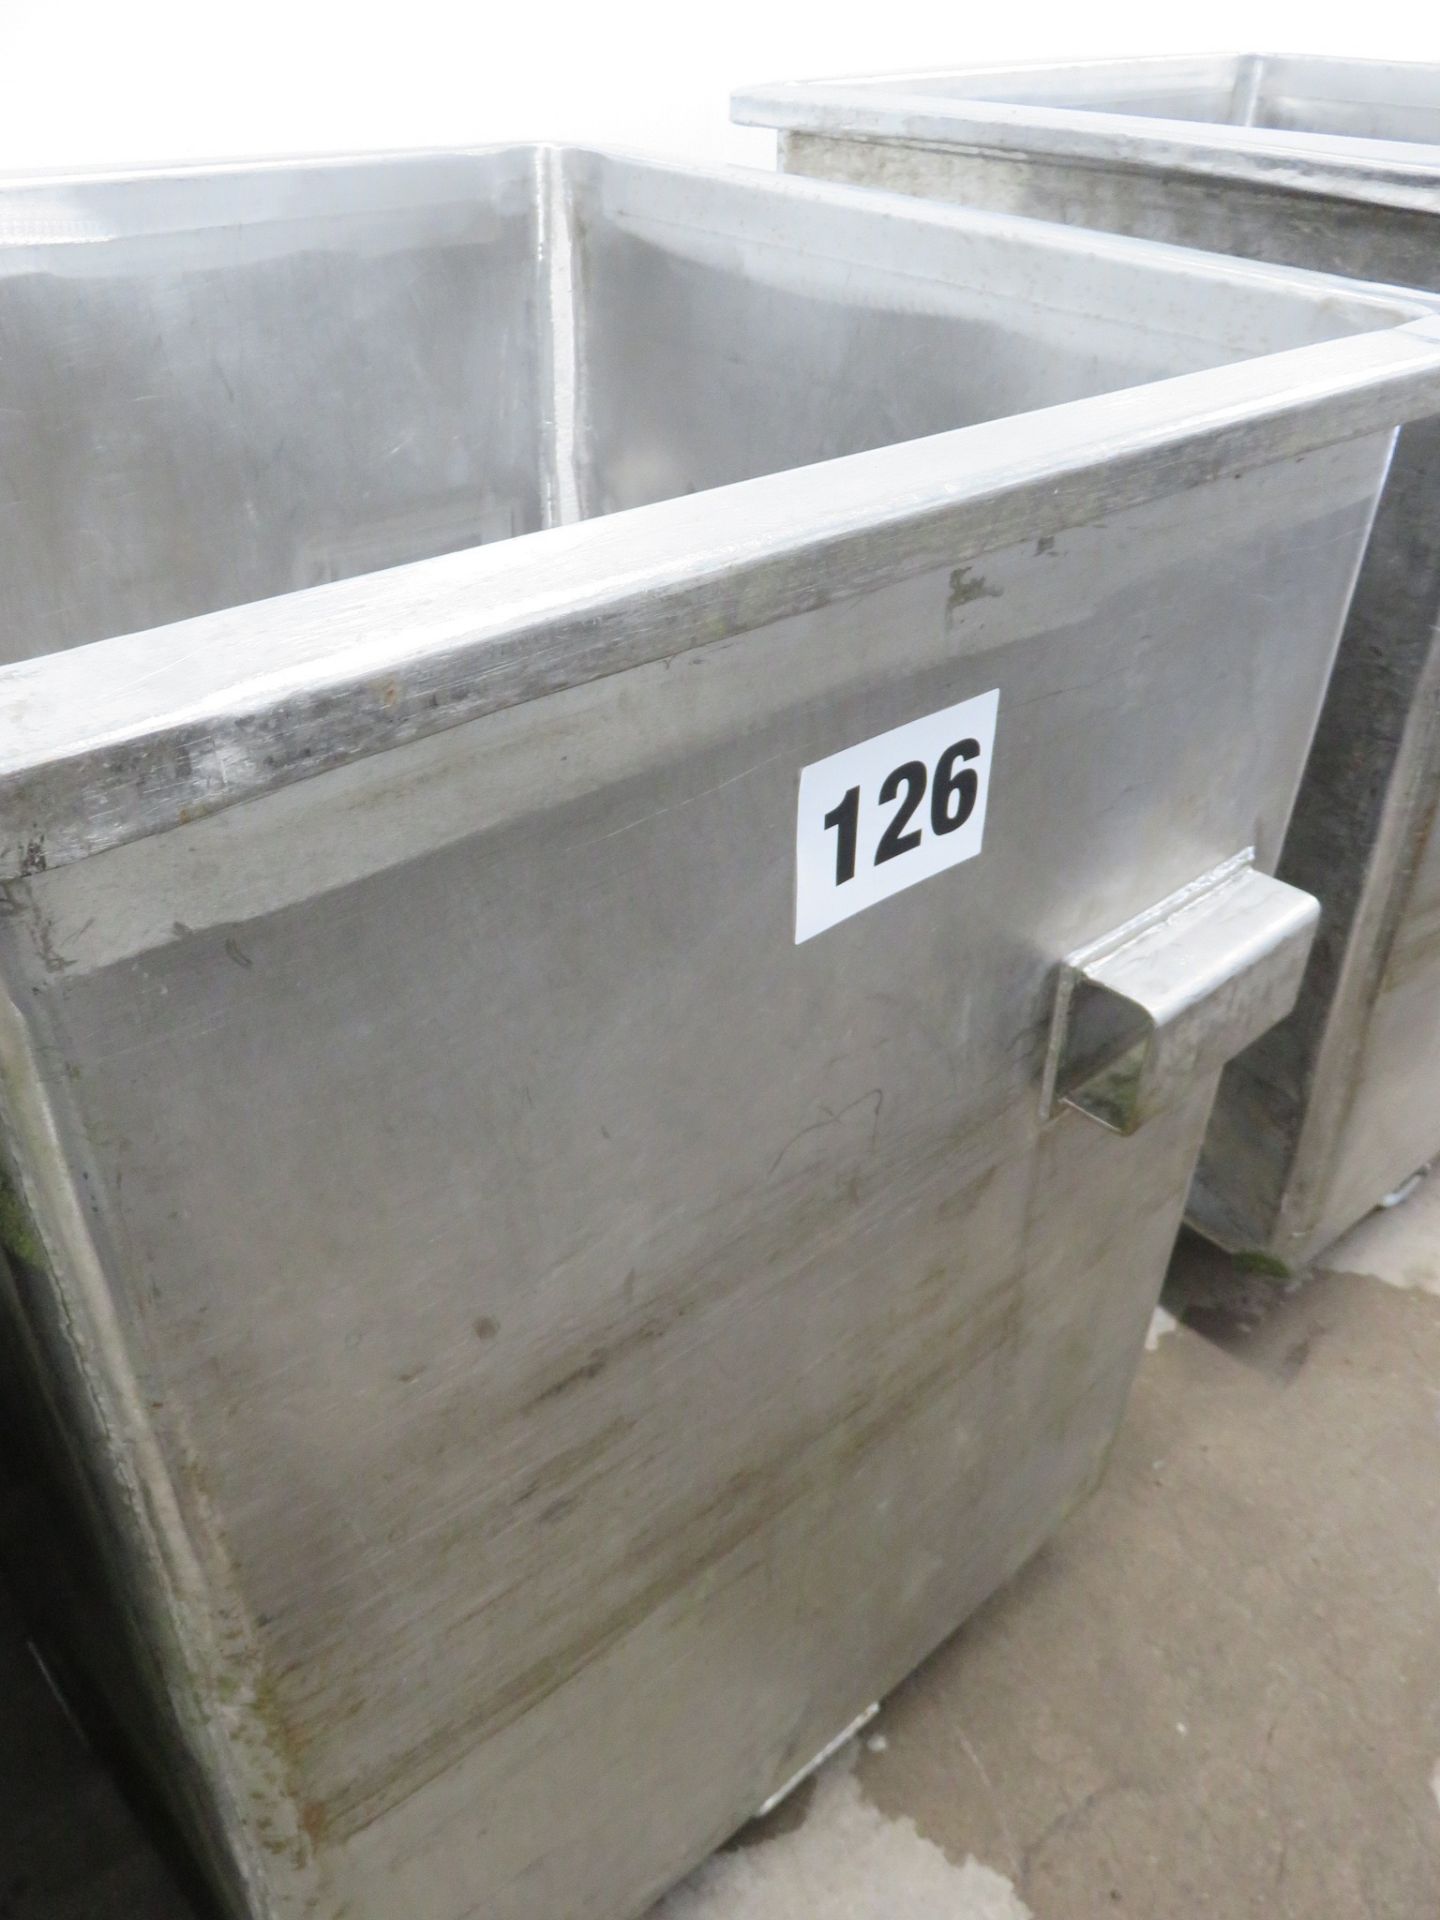 S/s Mobile Bins with bottom hole. Approx. internal 900mm x 900mm x 1150mm deep. Lift out £20